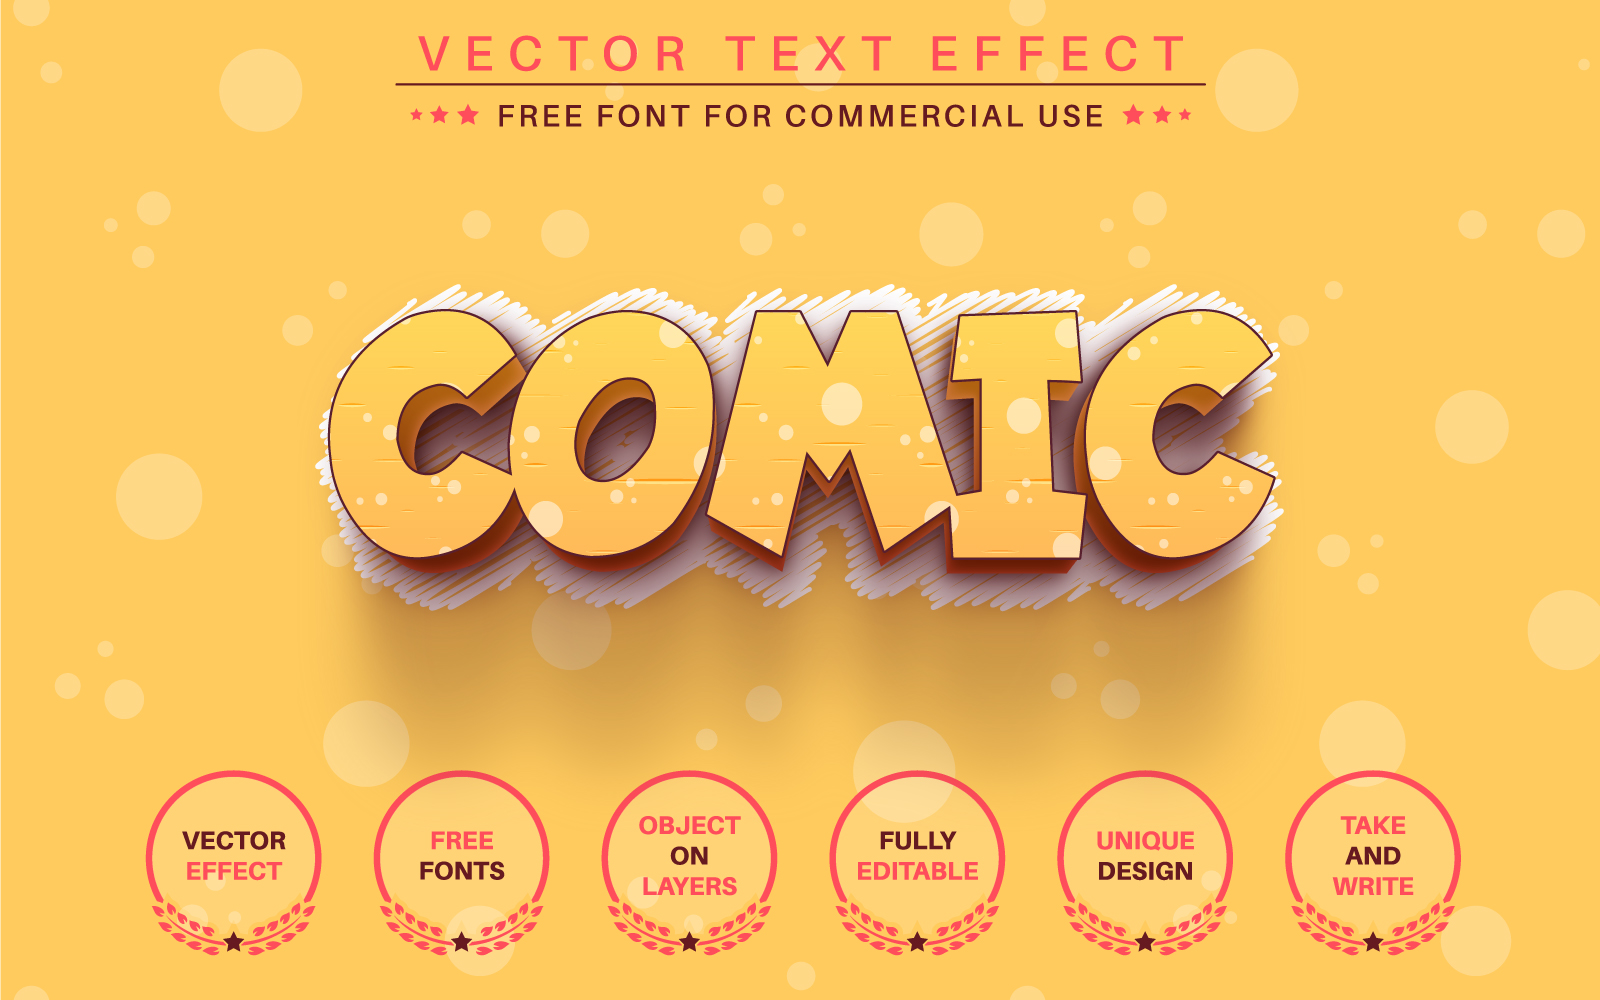 Bright Сomedian - Editable Text Effect, Font Style, Graphics Illustration